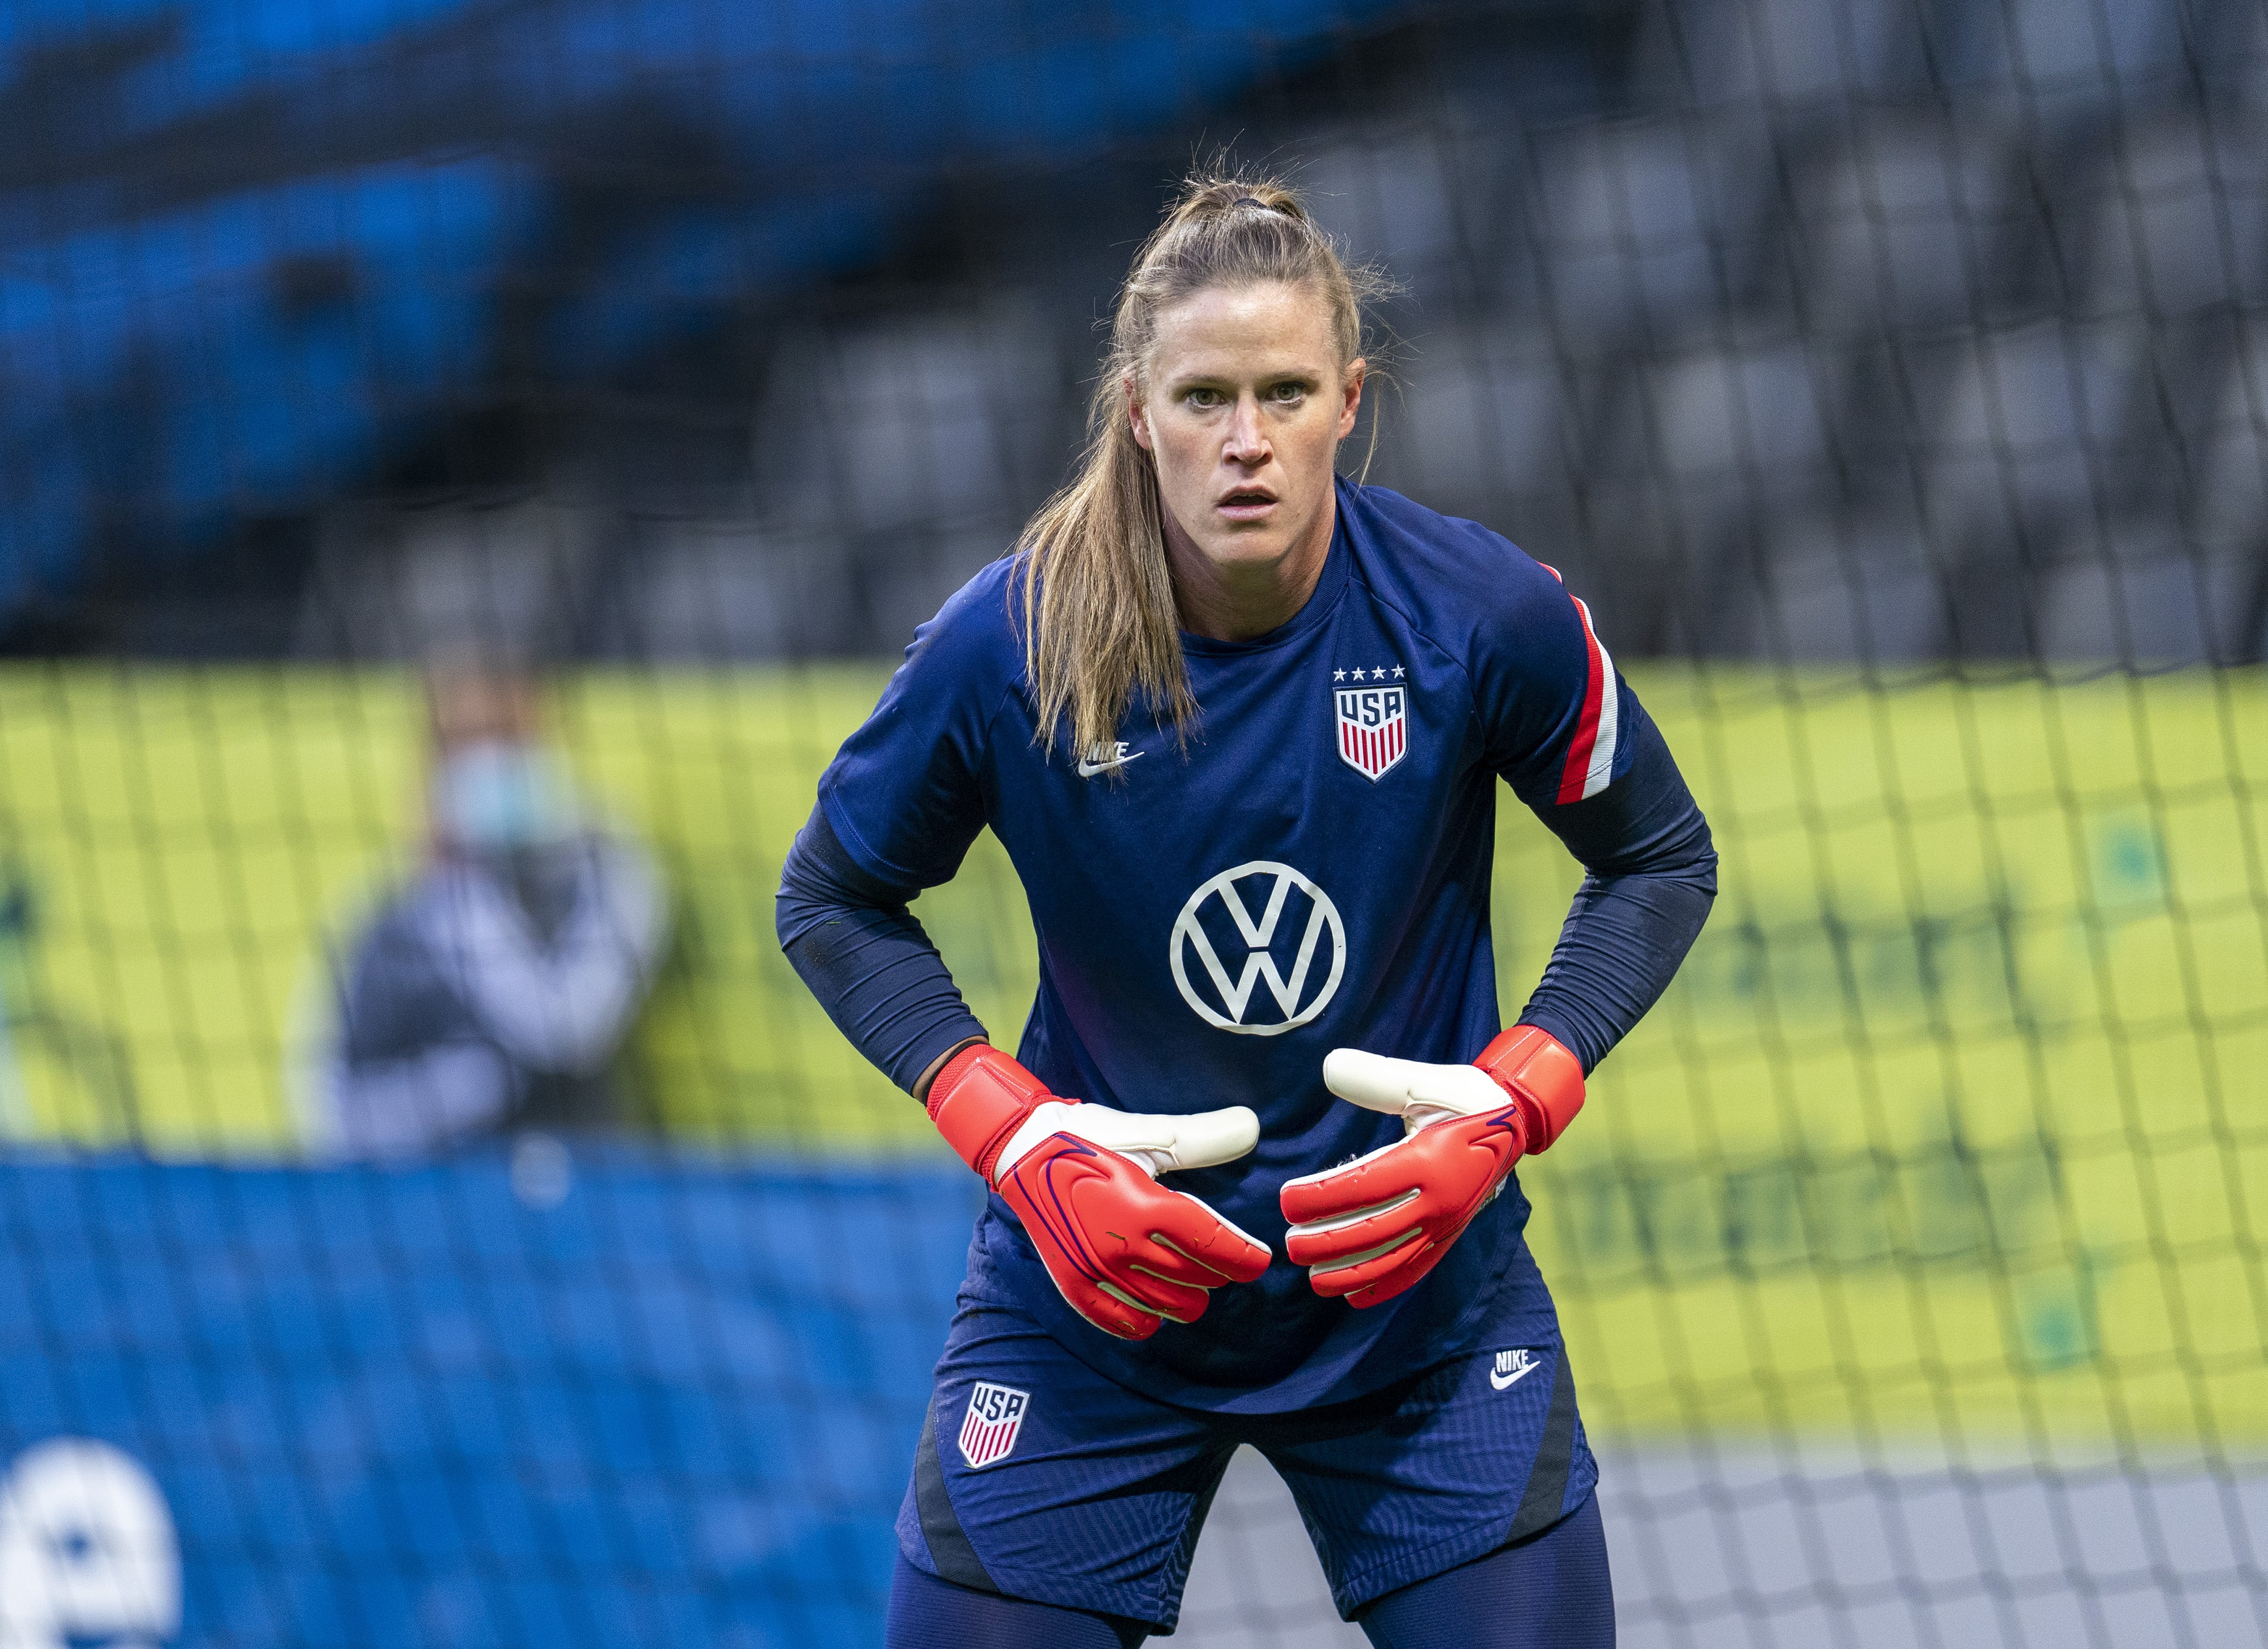 Meet the U.S. Olympic Women's Soccer Team Competing in Tokyo 